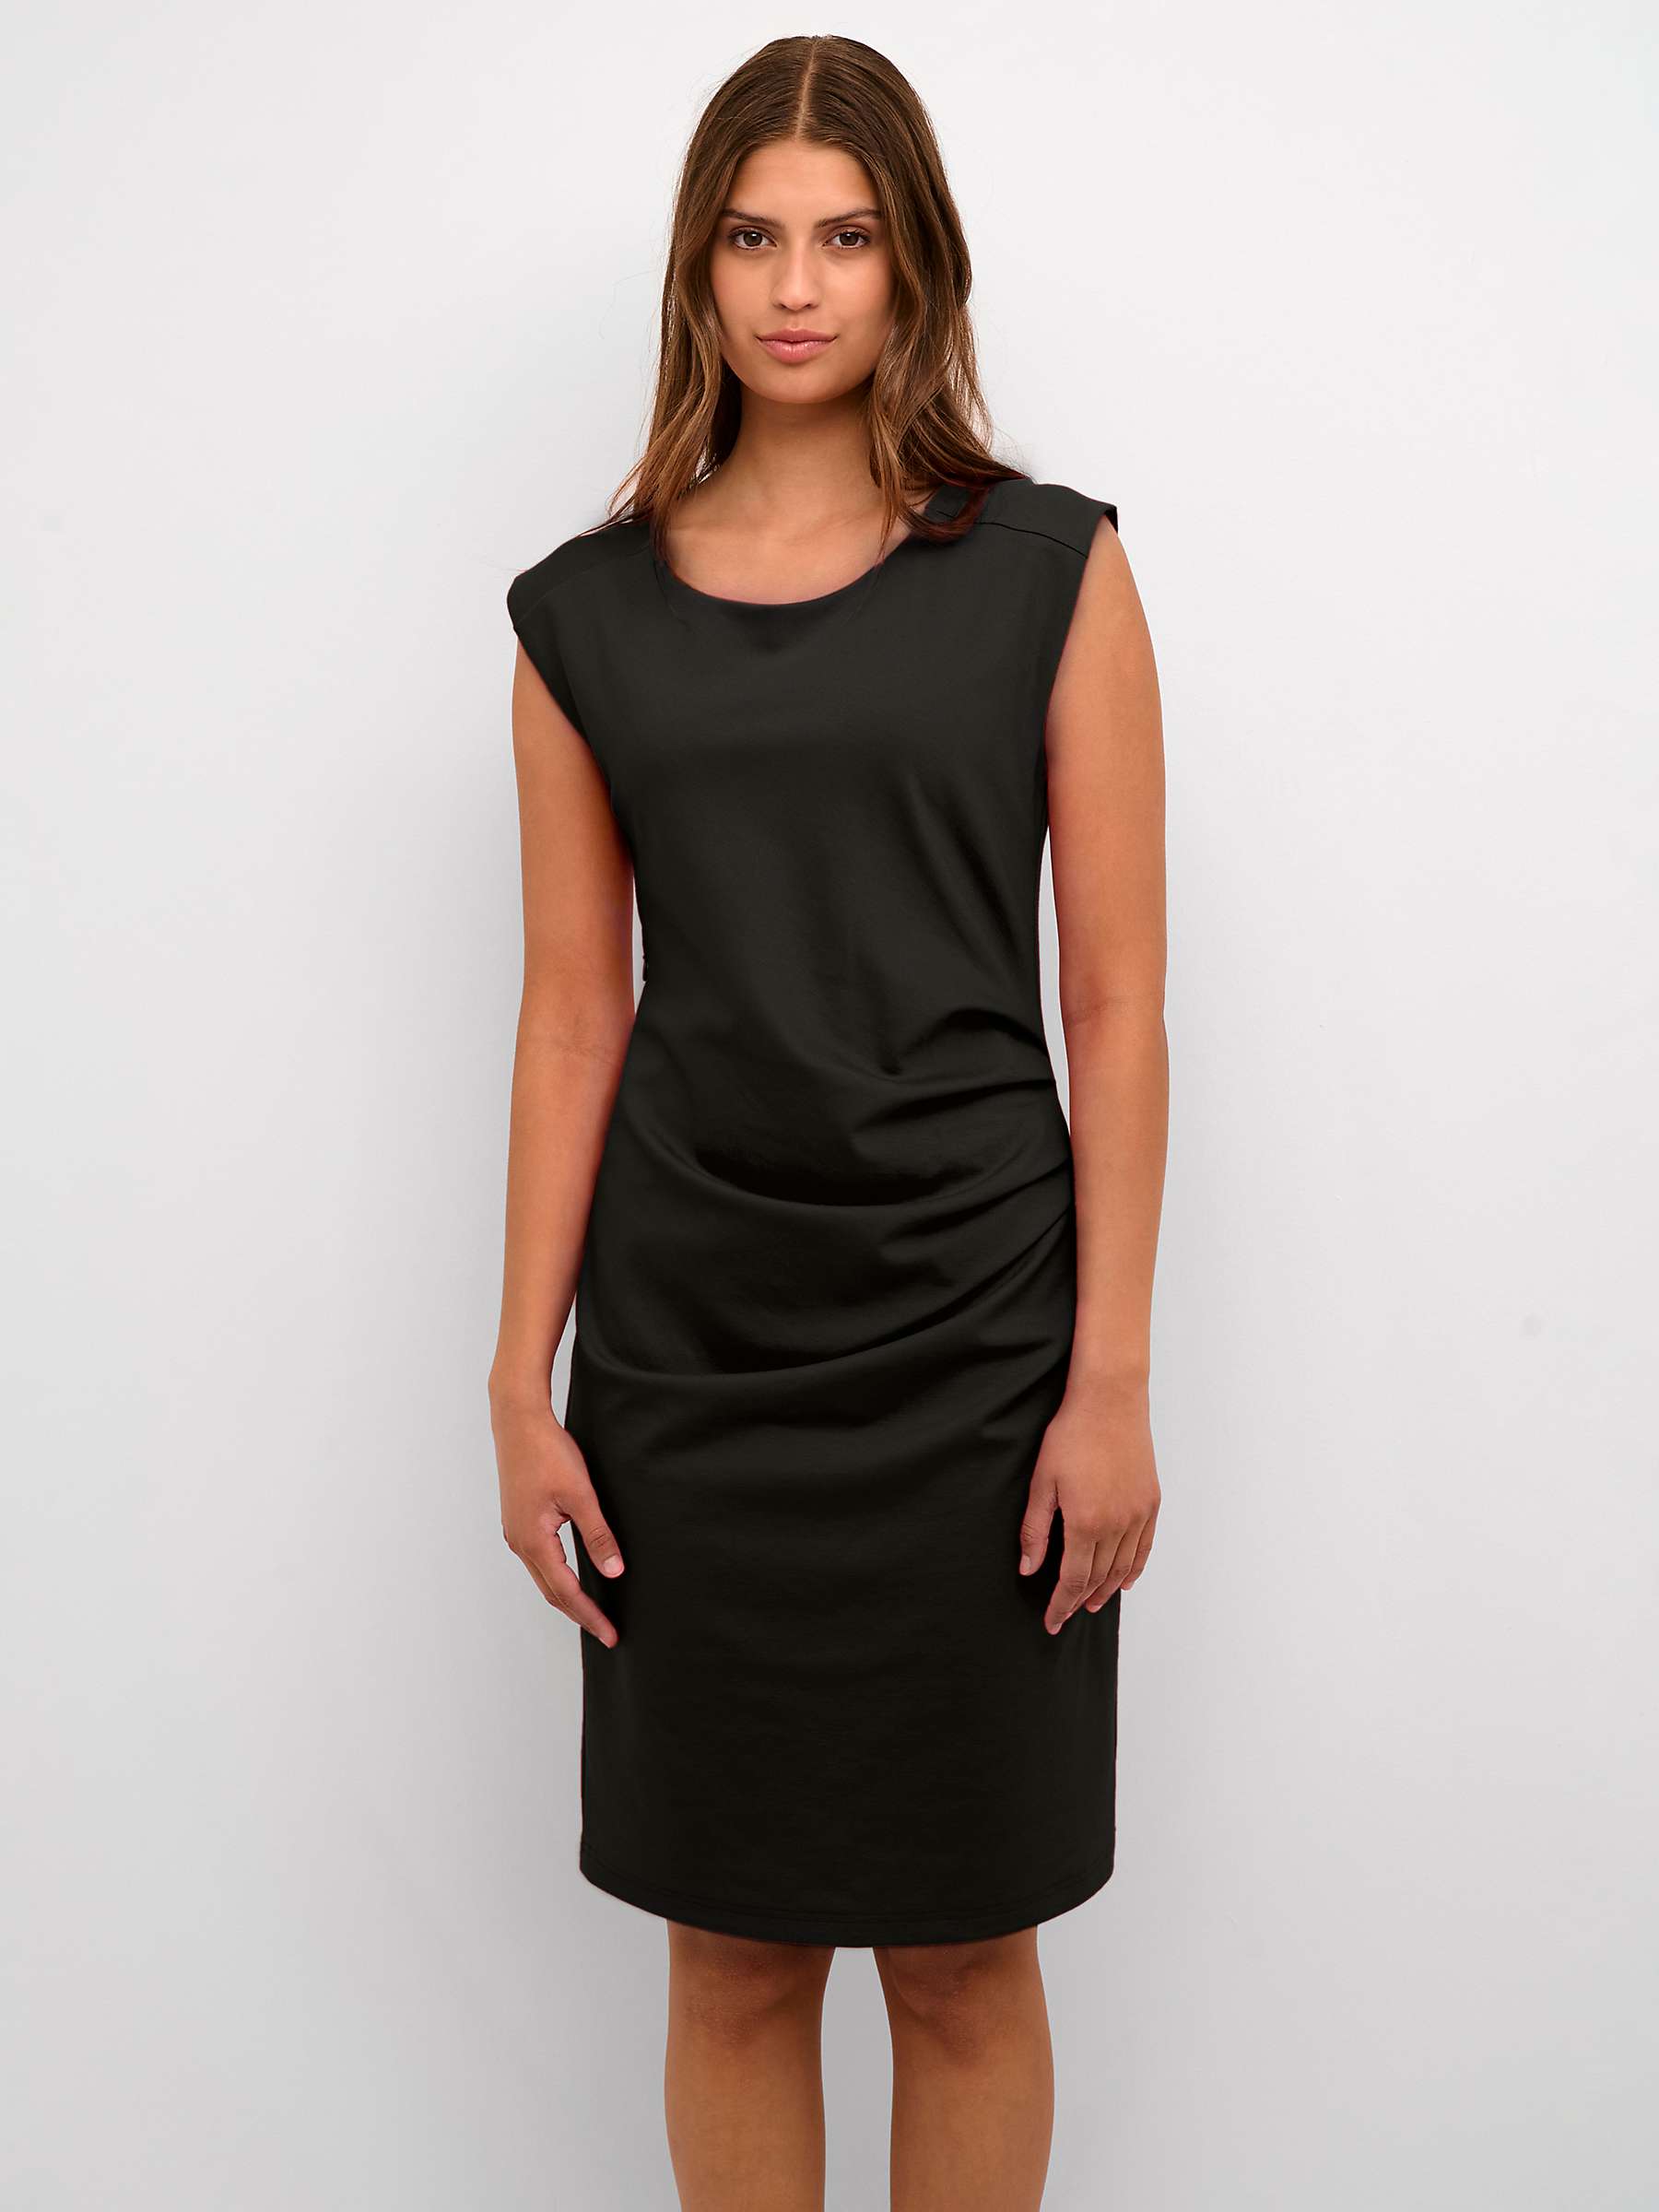 Buy KAFFE India Sleeveless Fitted Cocktail Dress, Black Deep Online at johnlewis.com